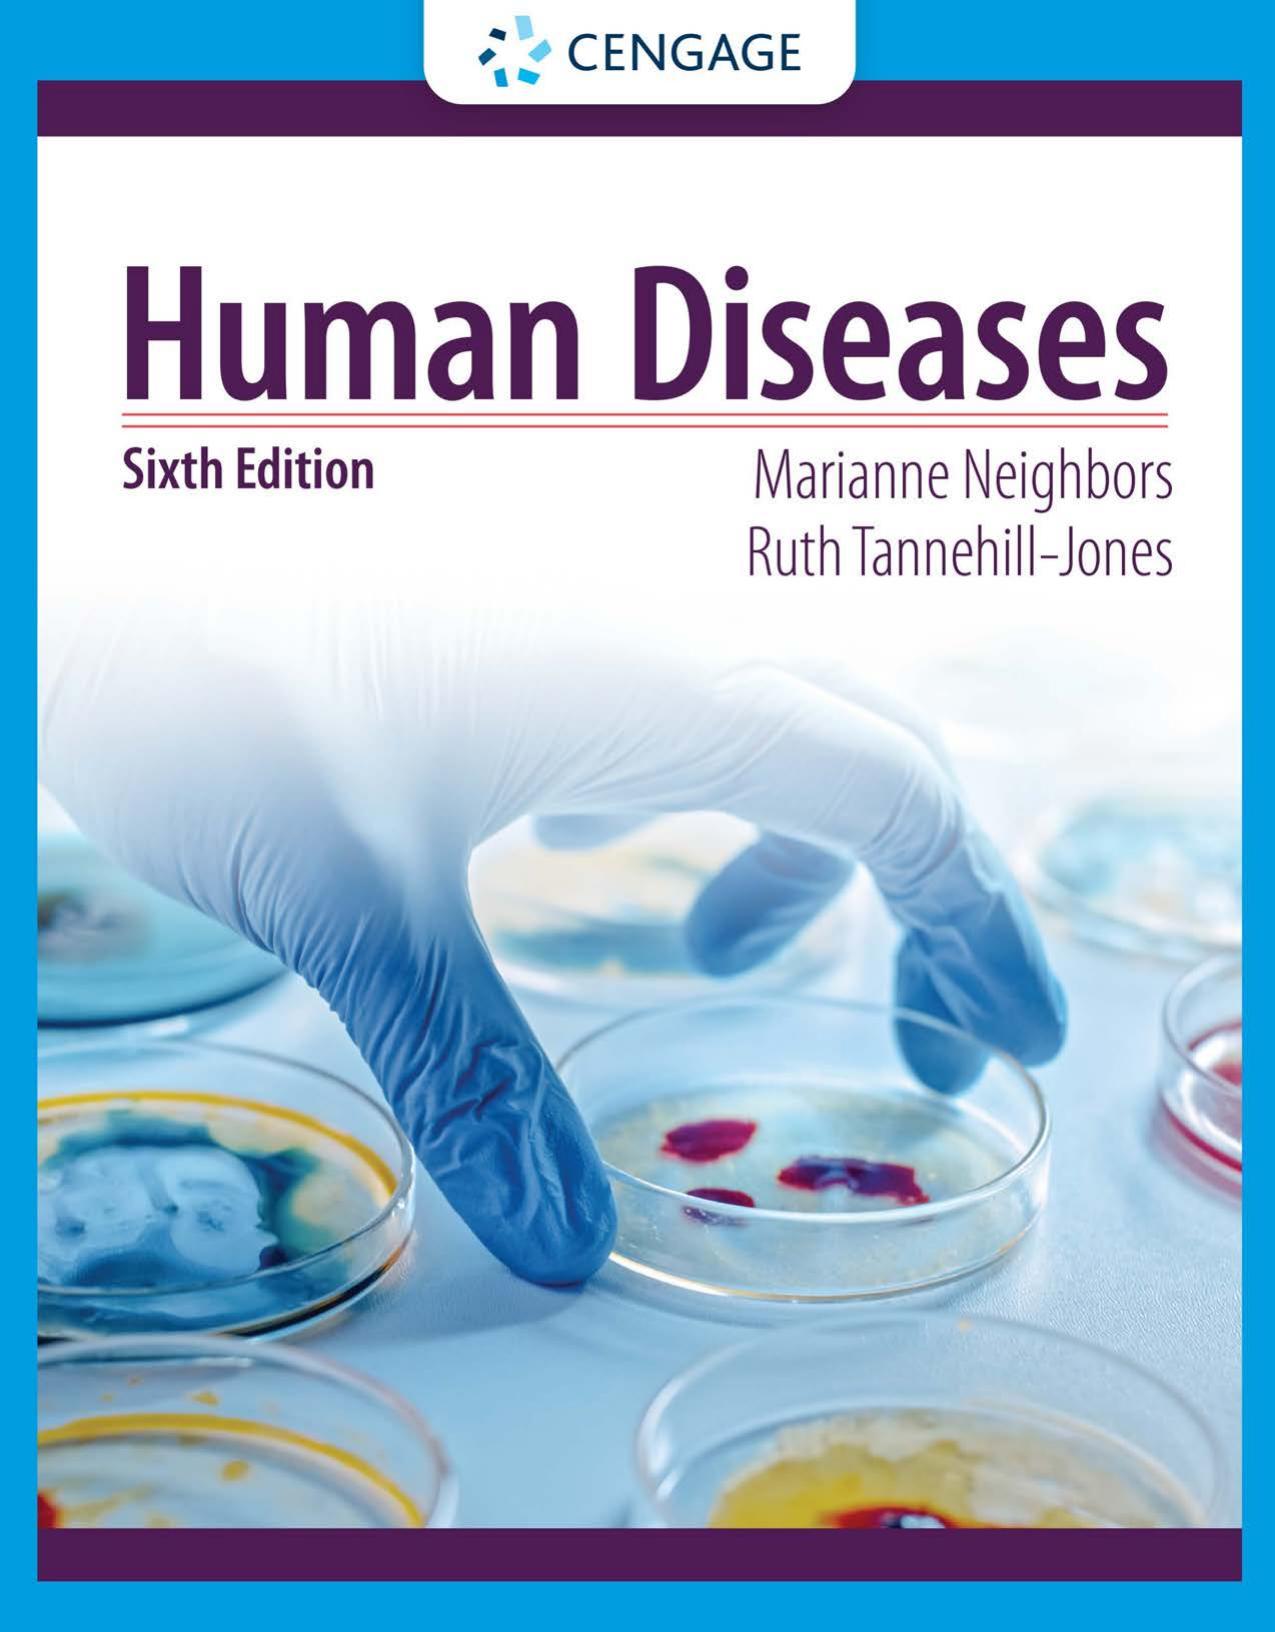 Human Diseases (MindTap Course List) (by Team-IRA) by Marianne Neighbors Ruth Tannehill-Jones